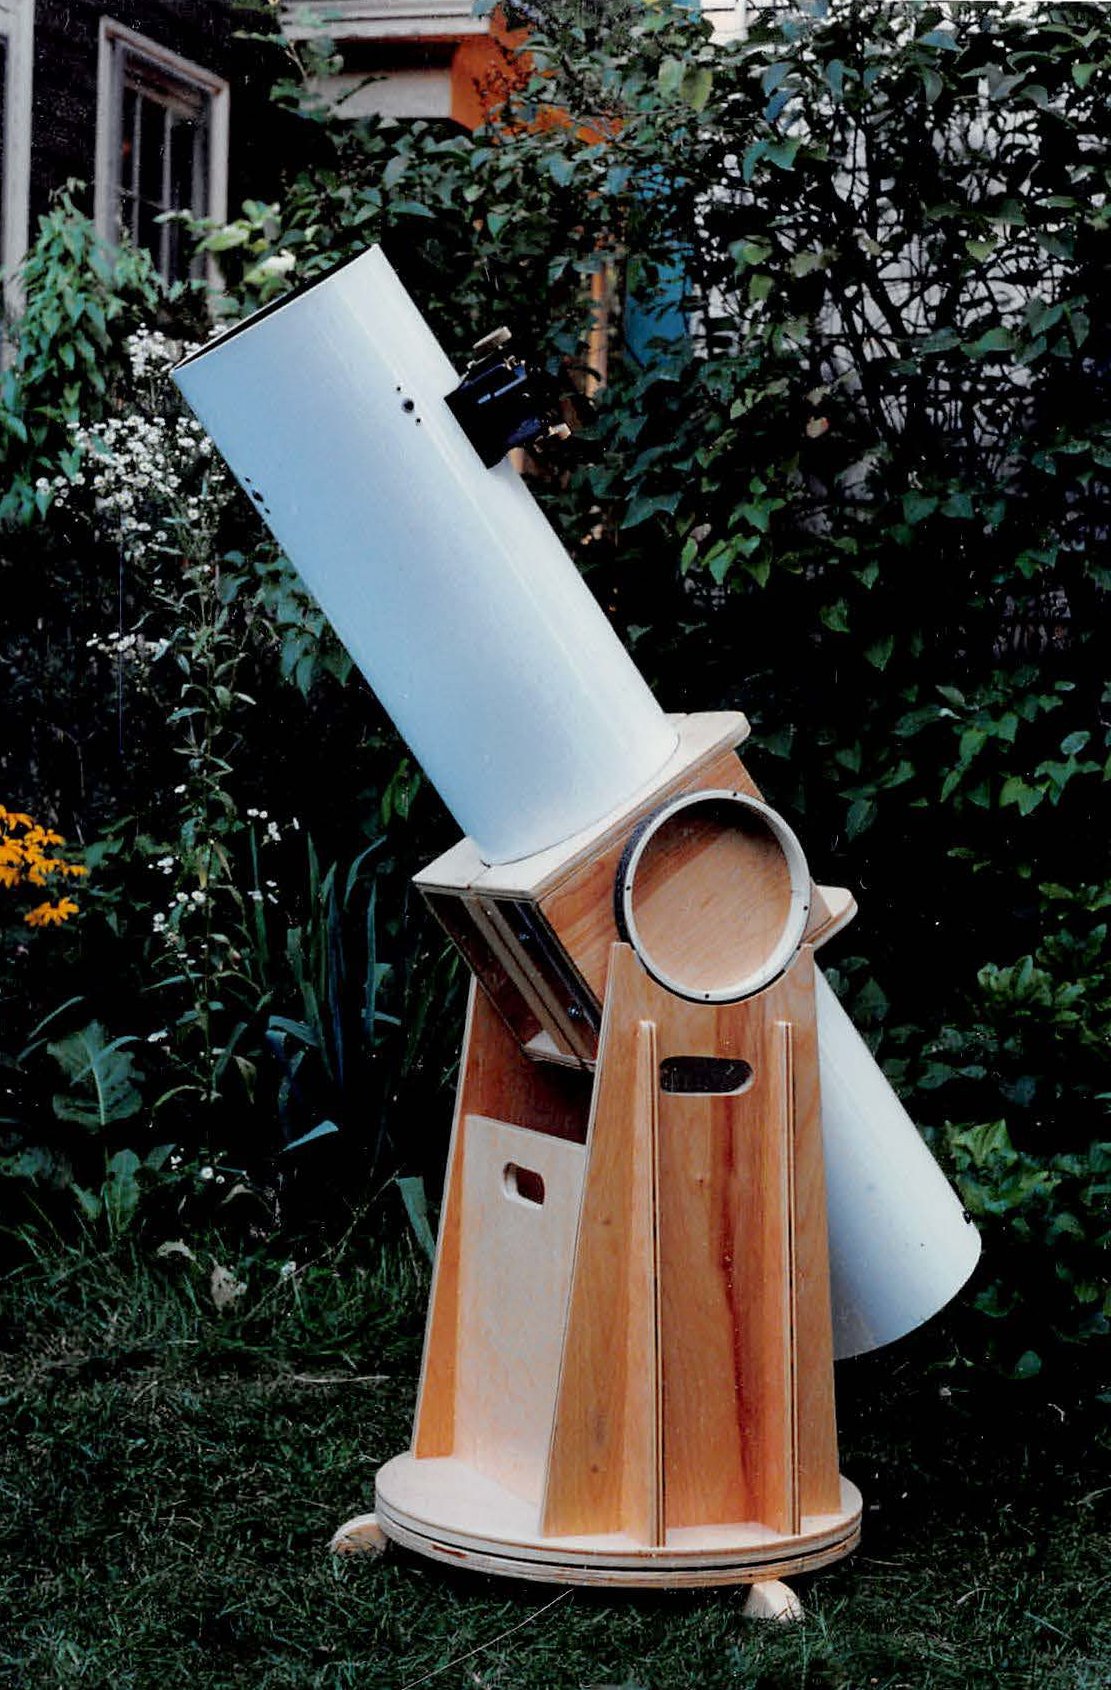 Completed 8 inch Dobsonian telescope